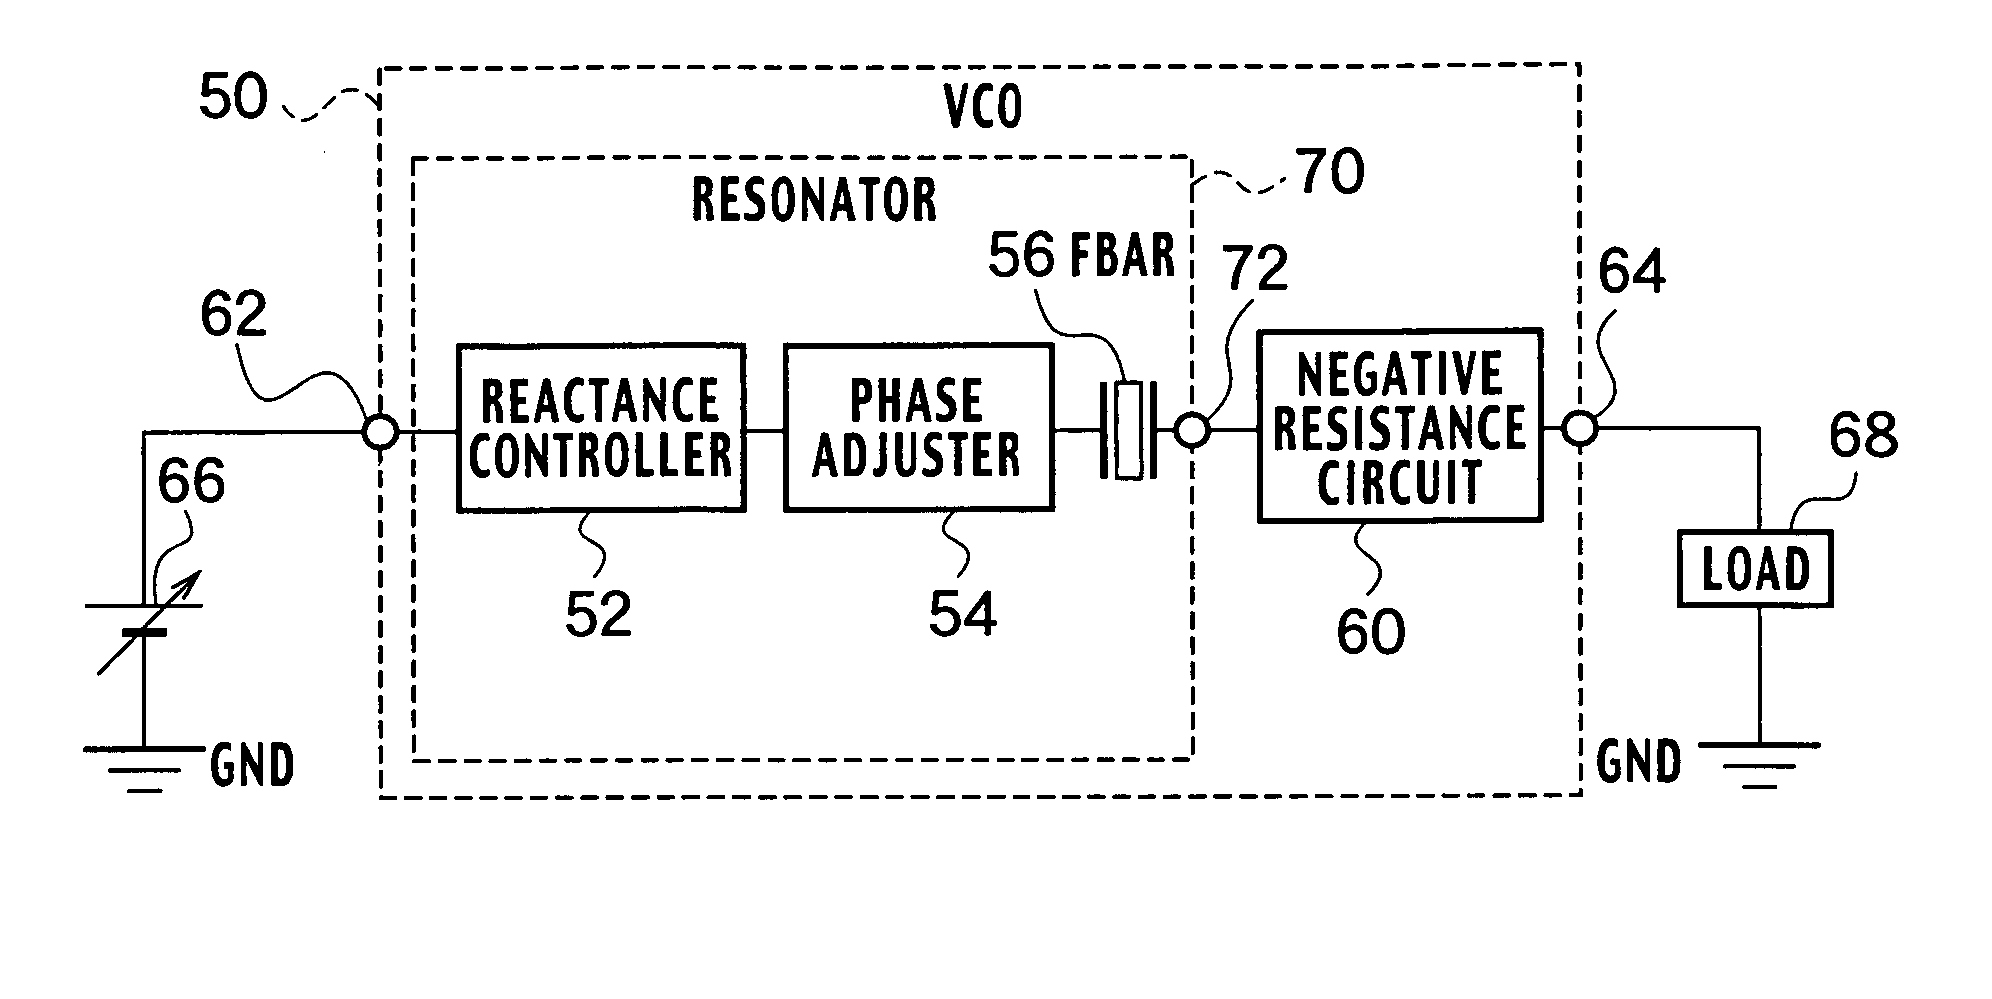 Voltage controlled oscillator, frequency synthesizer and communication apparatus